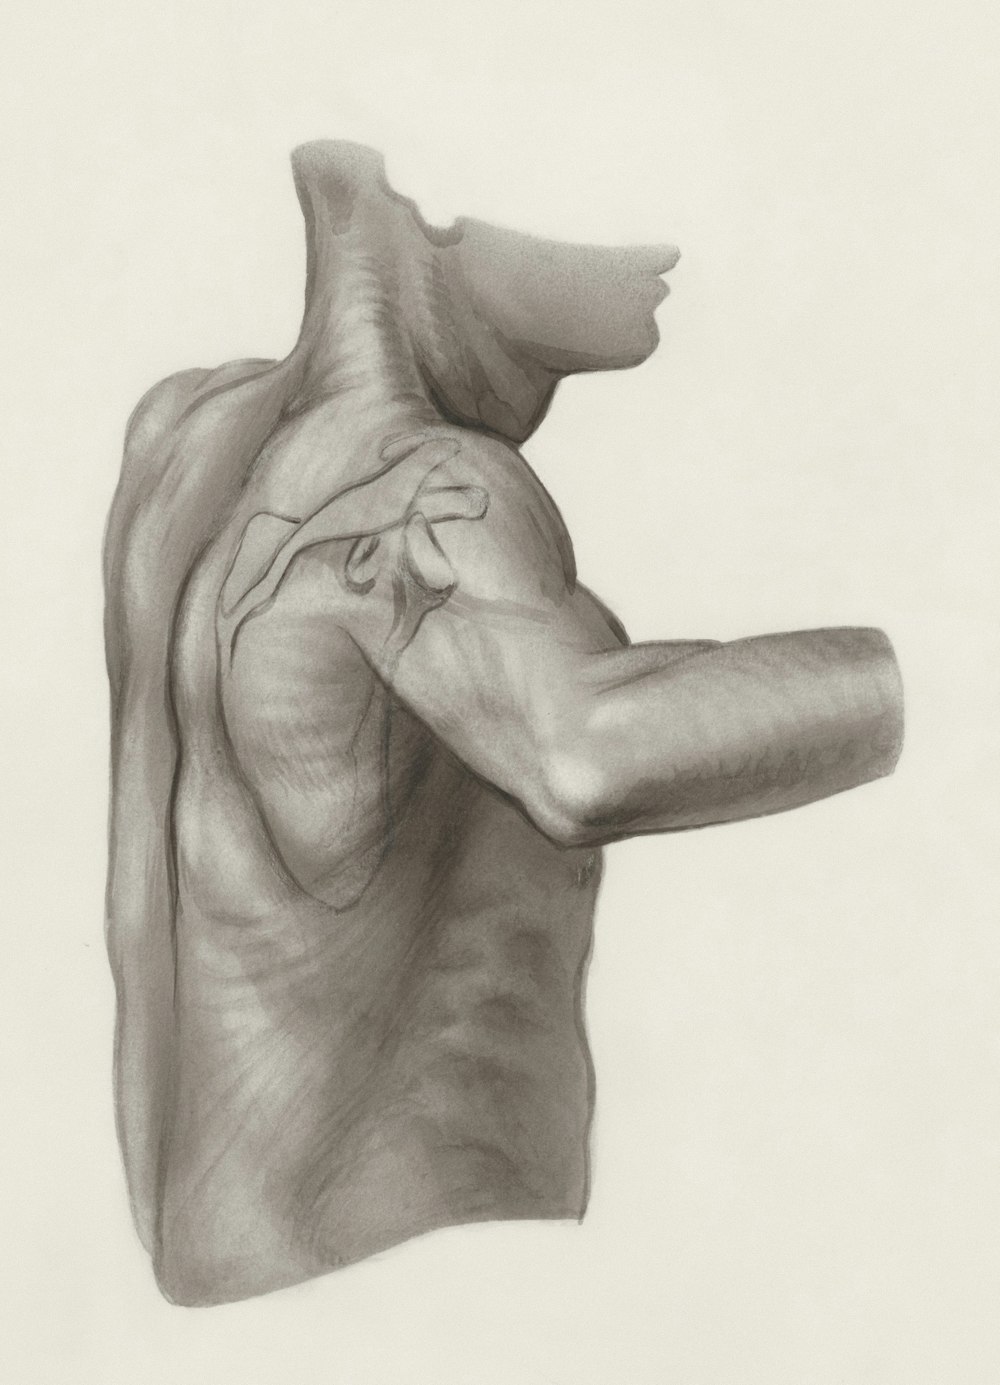 a drawing of a man's arm and shoulder